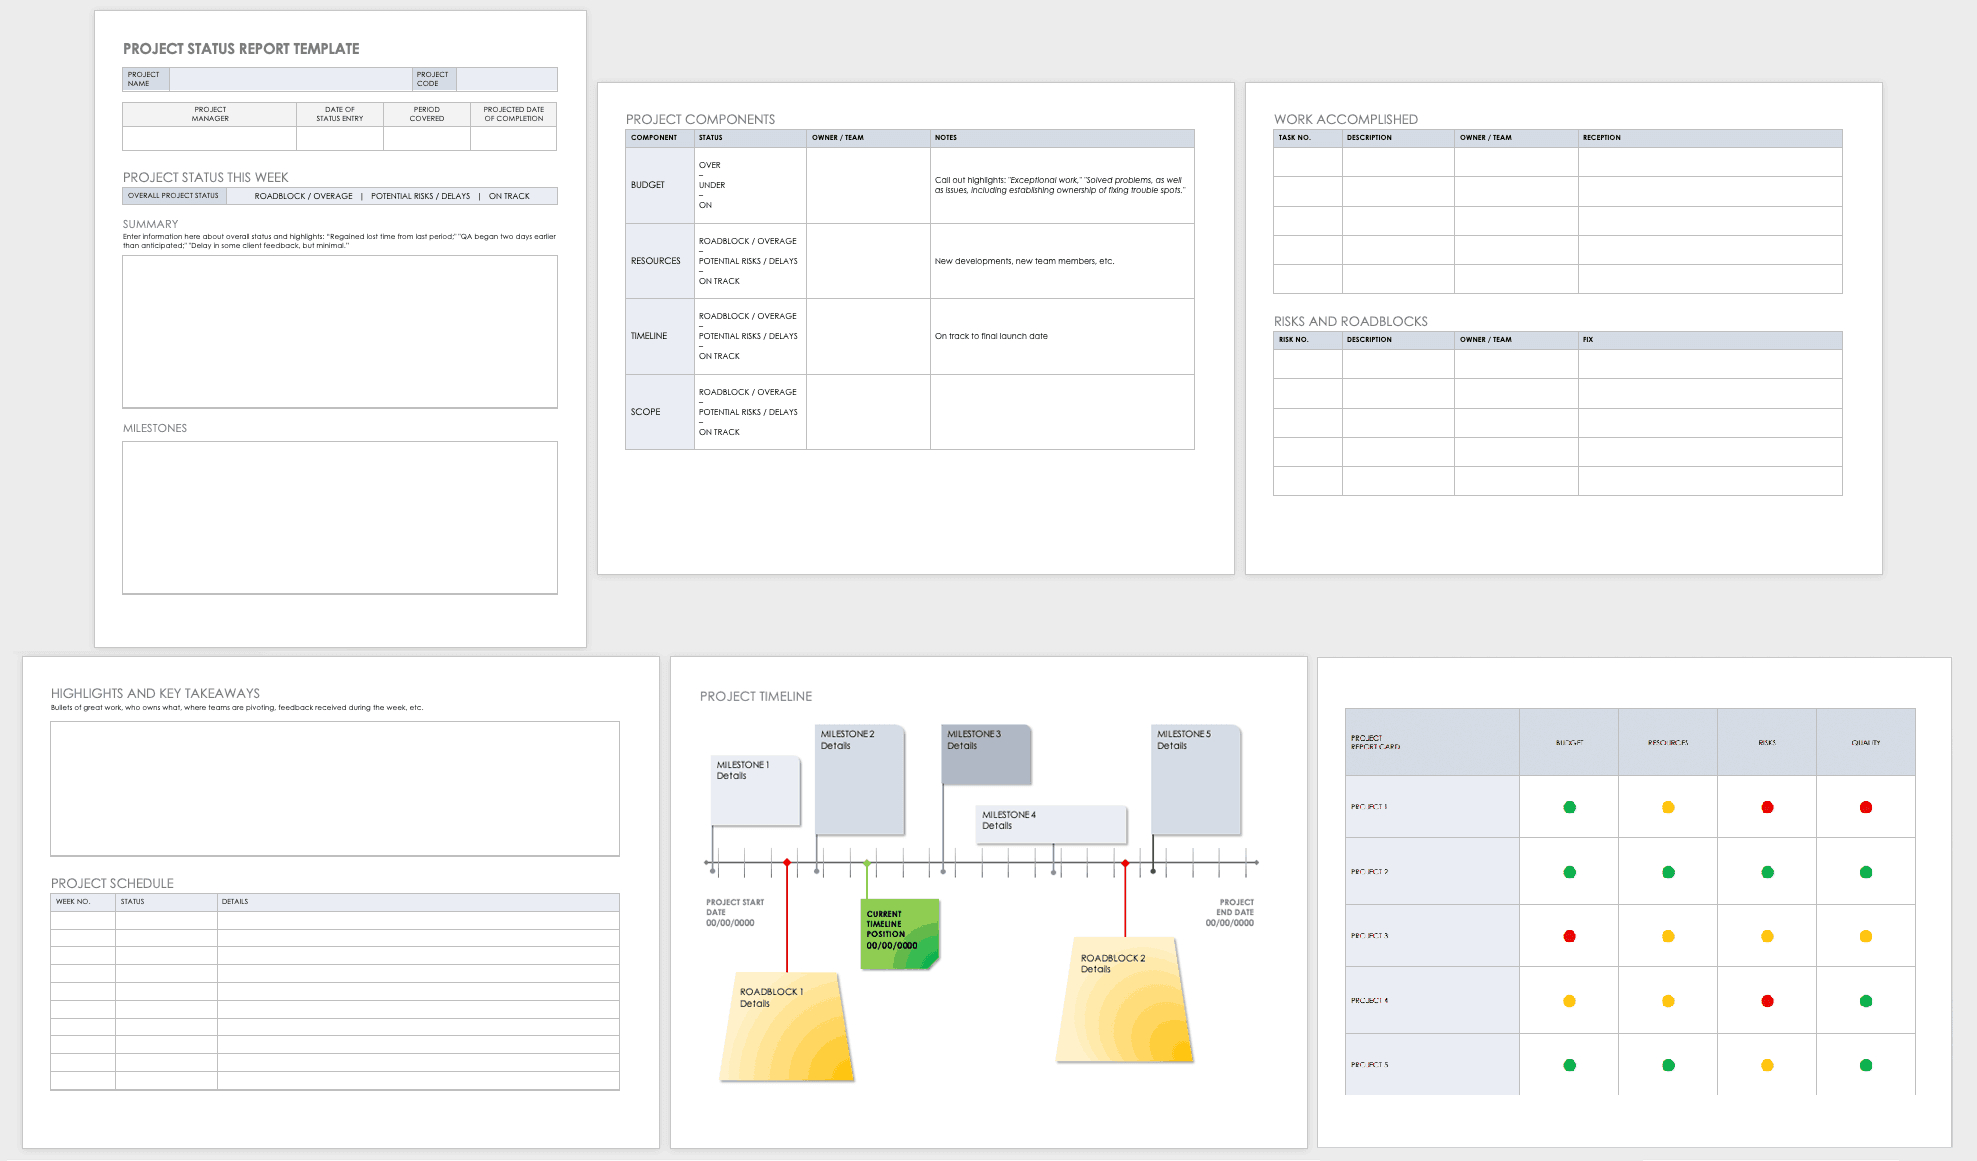 Free Project Report Templates | Smartsheet Inside Executive Summary Project Status Report Template